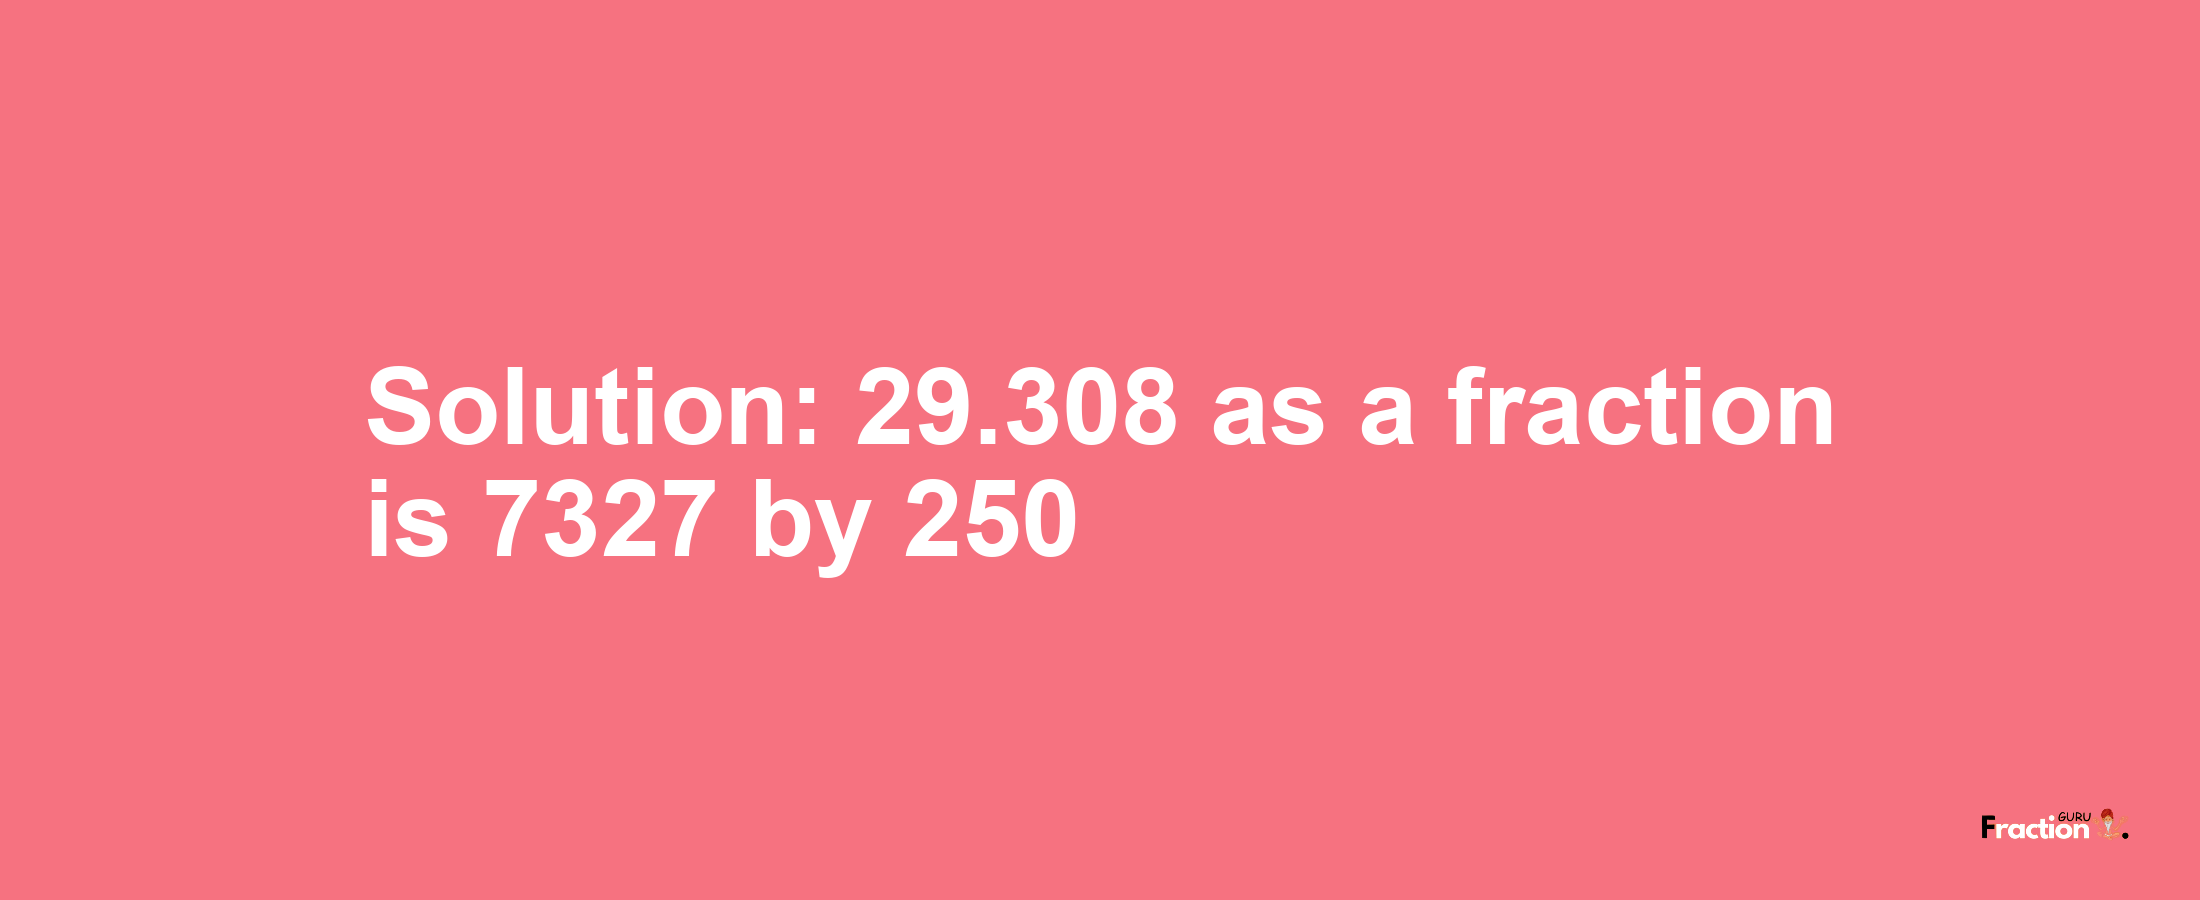 Solution:29.308 as a fraction is 7327/250